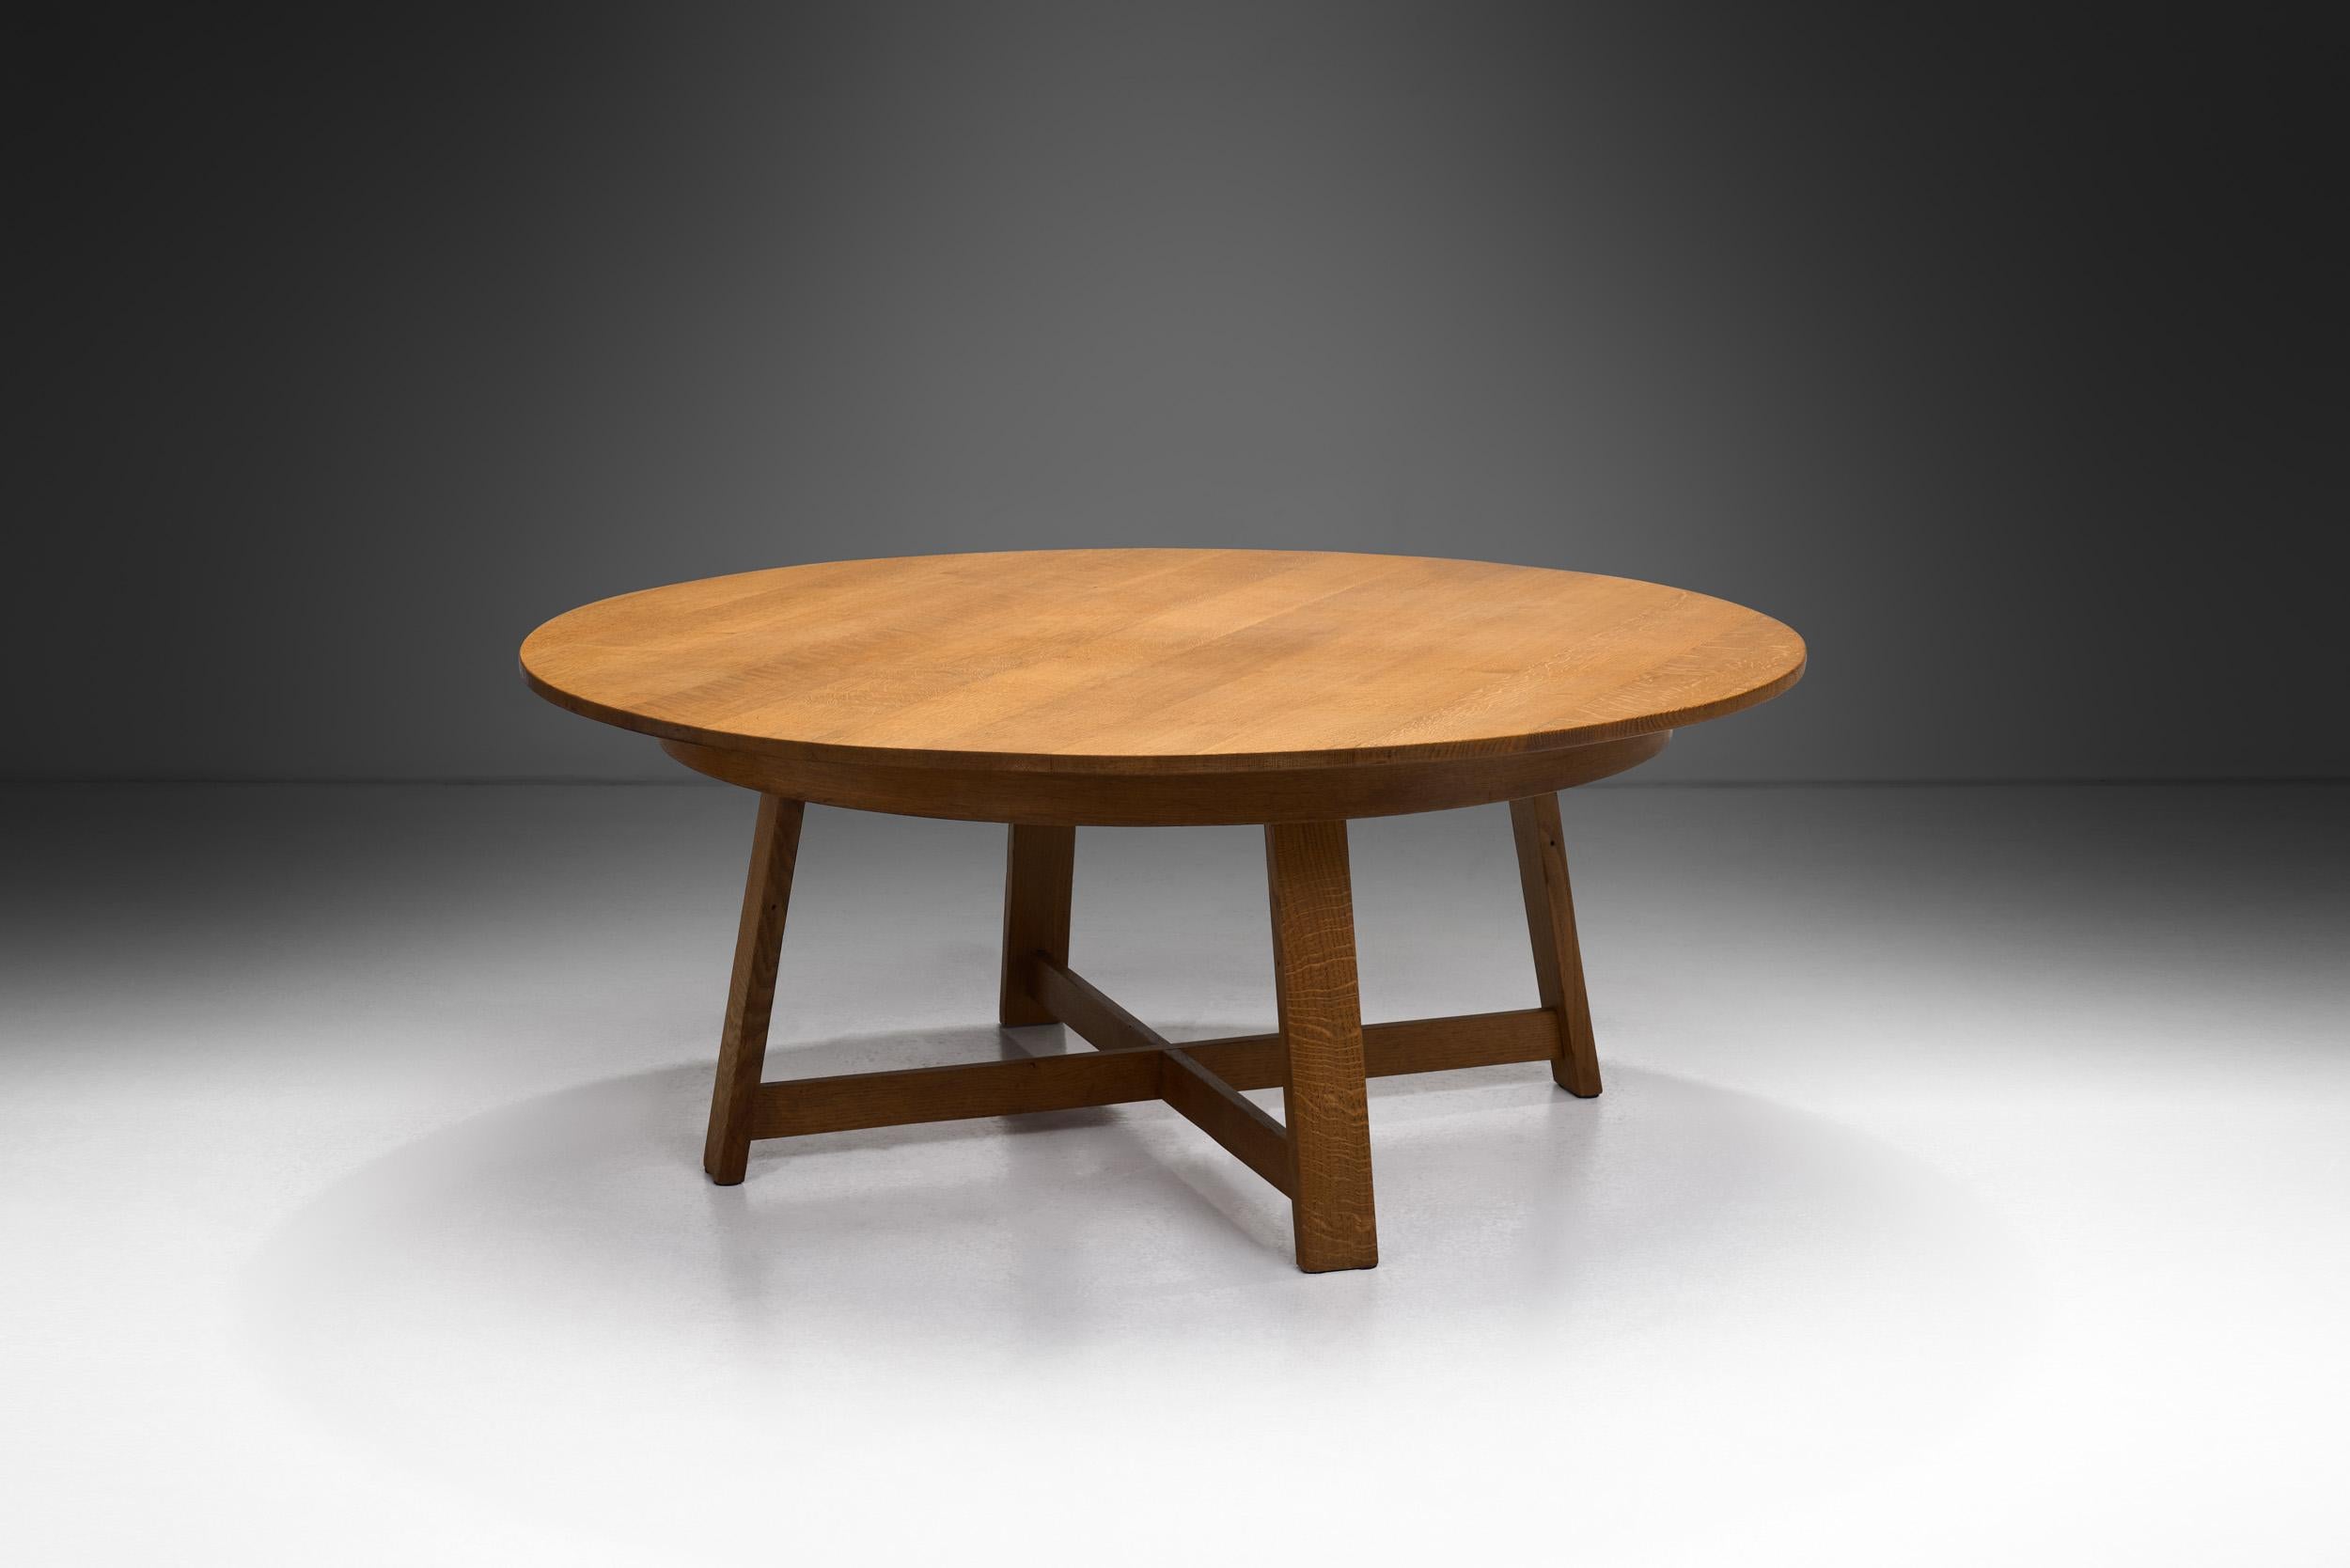 This circular table embodies the essence of European mid-century design with its distinct features that harken back to a time when form and function were paramount. Crafted from solid wood, this table exudes a rustic charm and robust aesthetic that